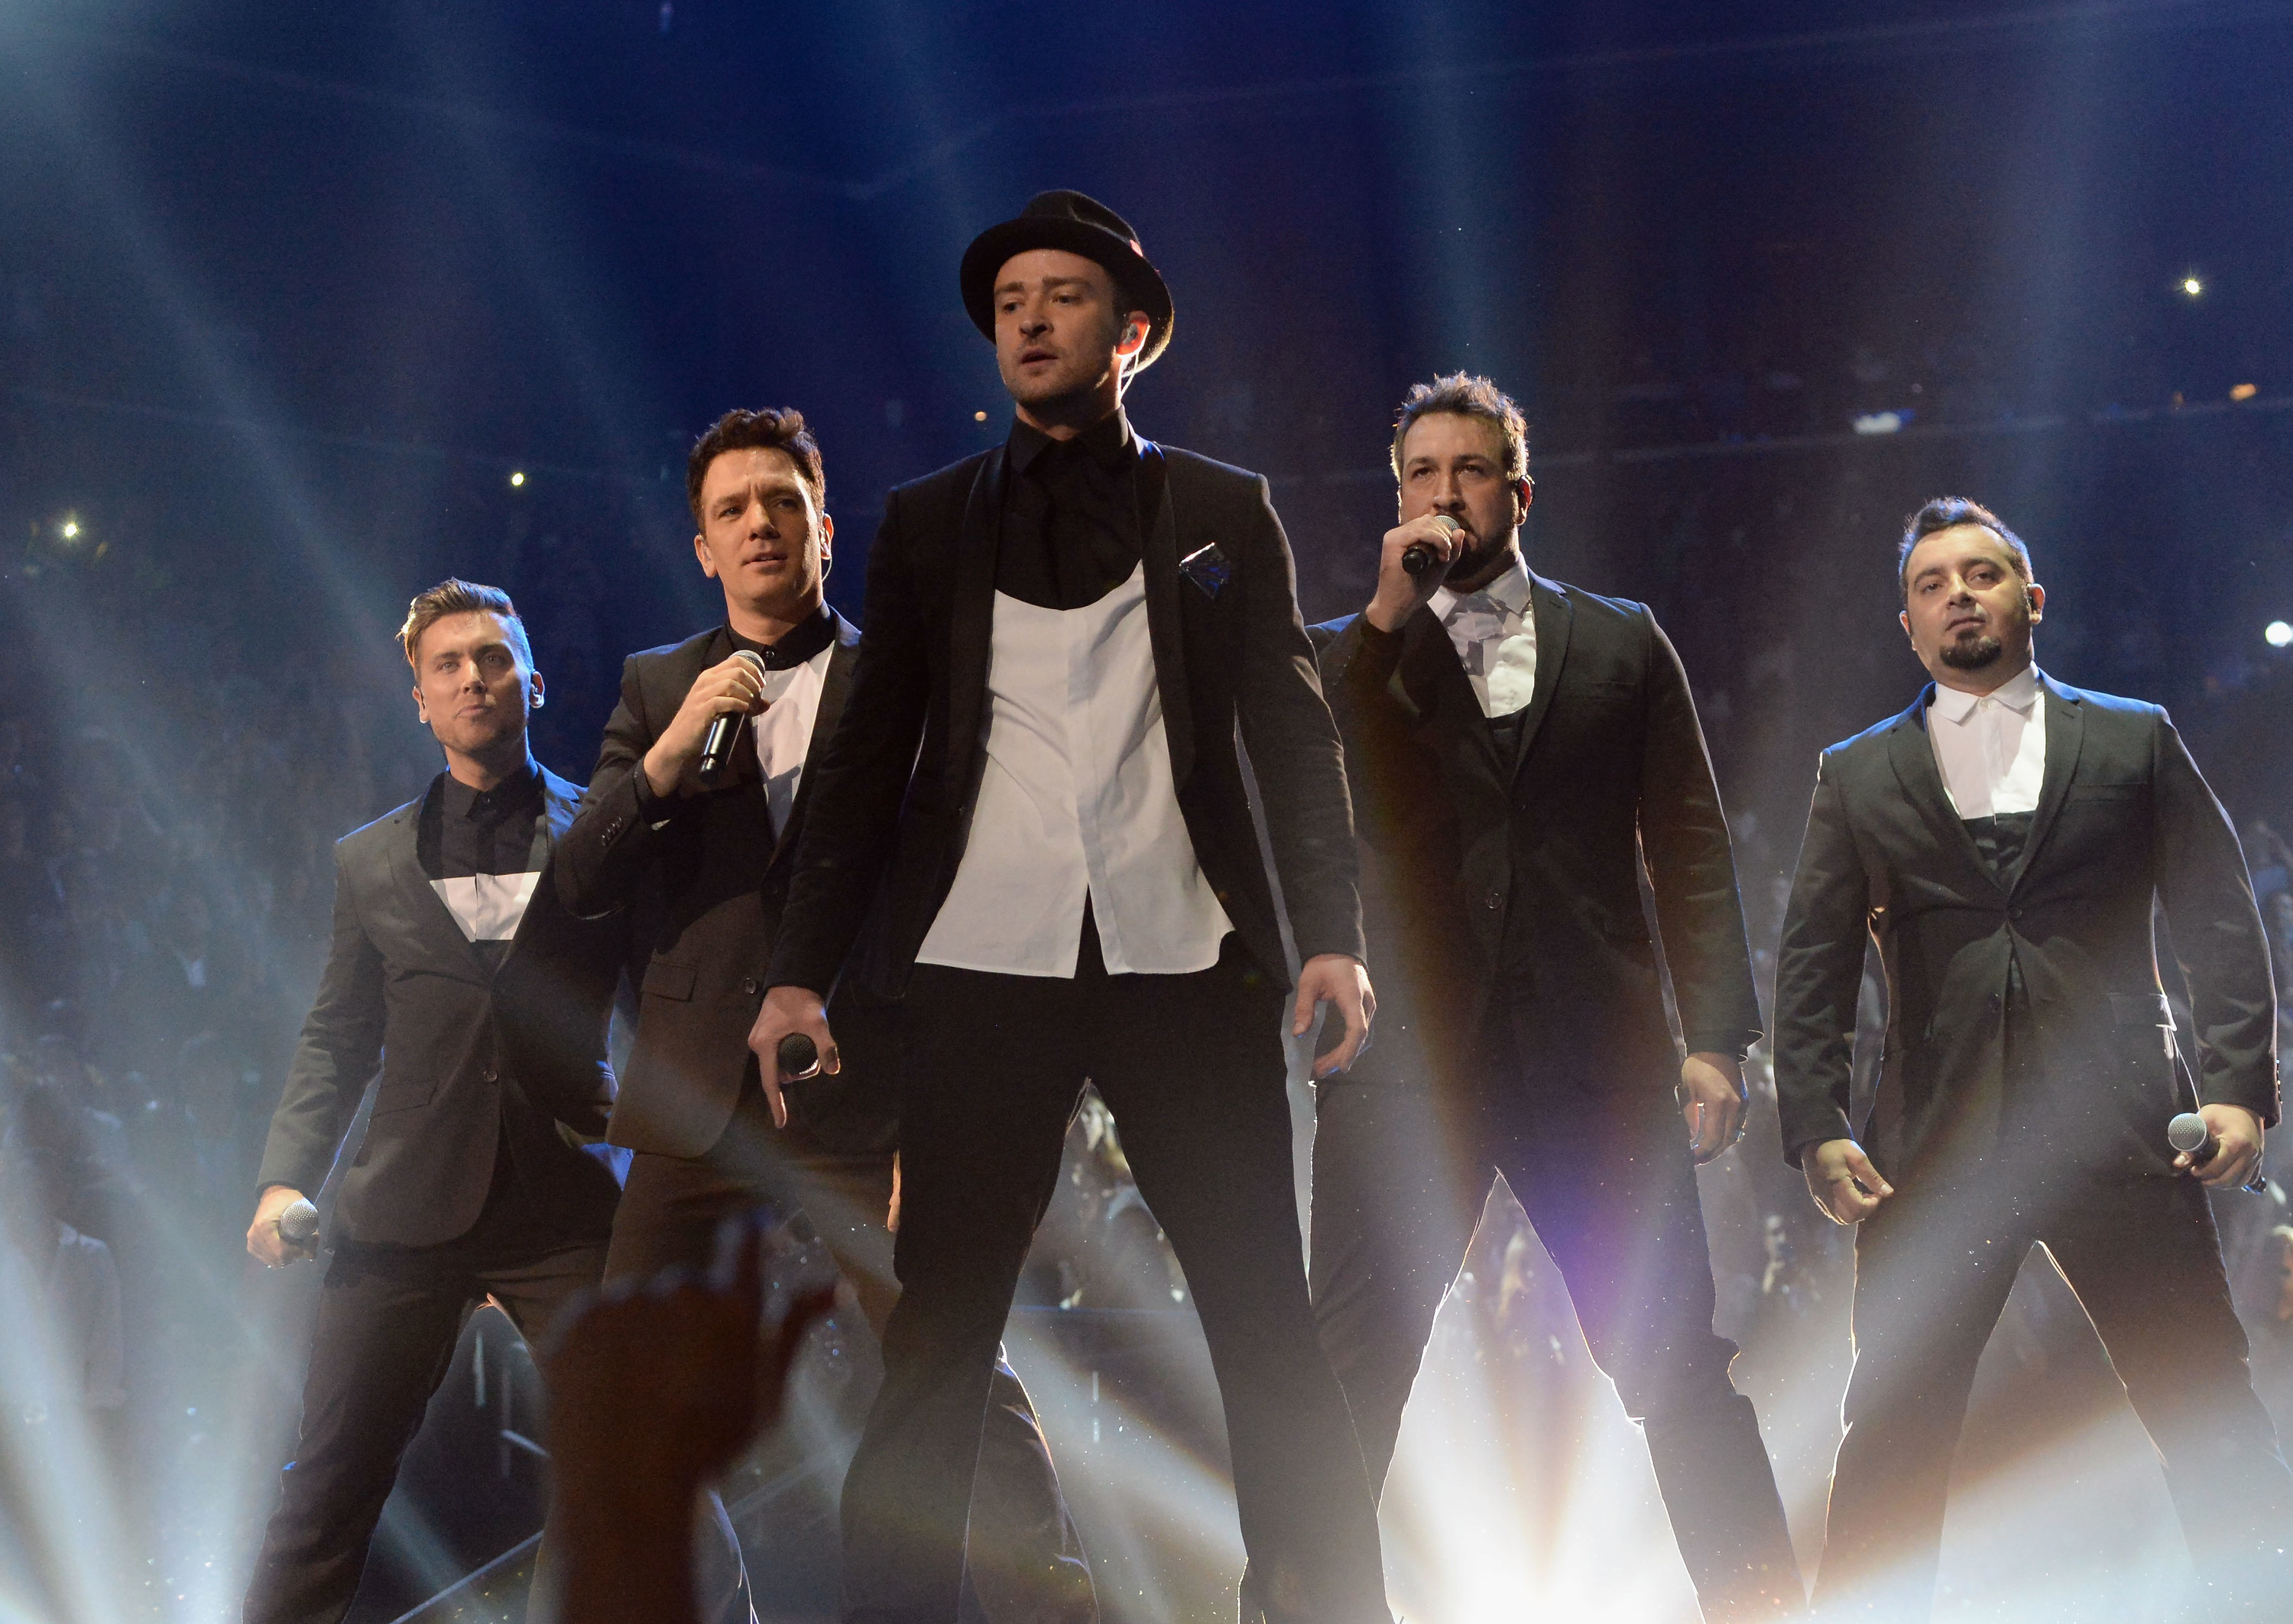 (L-R) Lance Bass, JC Chasez, Justin Timberlake, Joey Fatone and Chris Kirkpatrick of N Sync perform during the 2013 MTV Video Music Awards at the Barclays Center on August 25, 2013 in the Brooklyn borough of New York City.